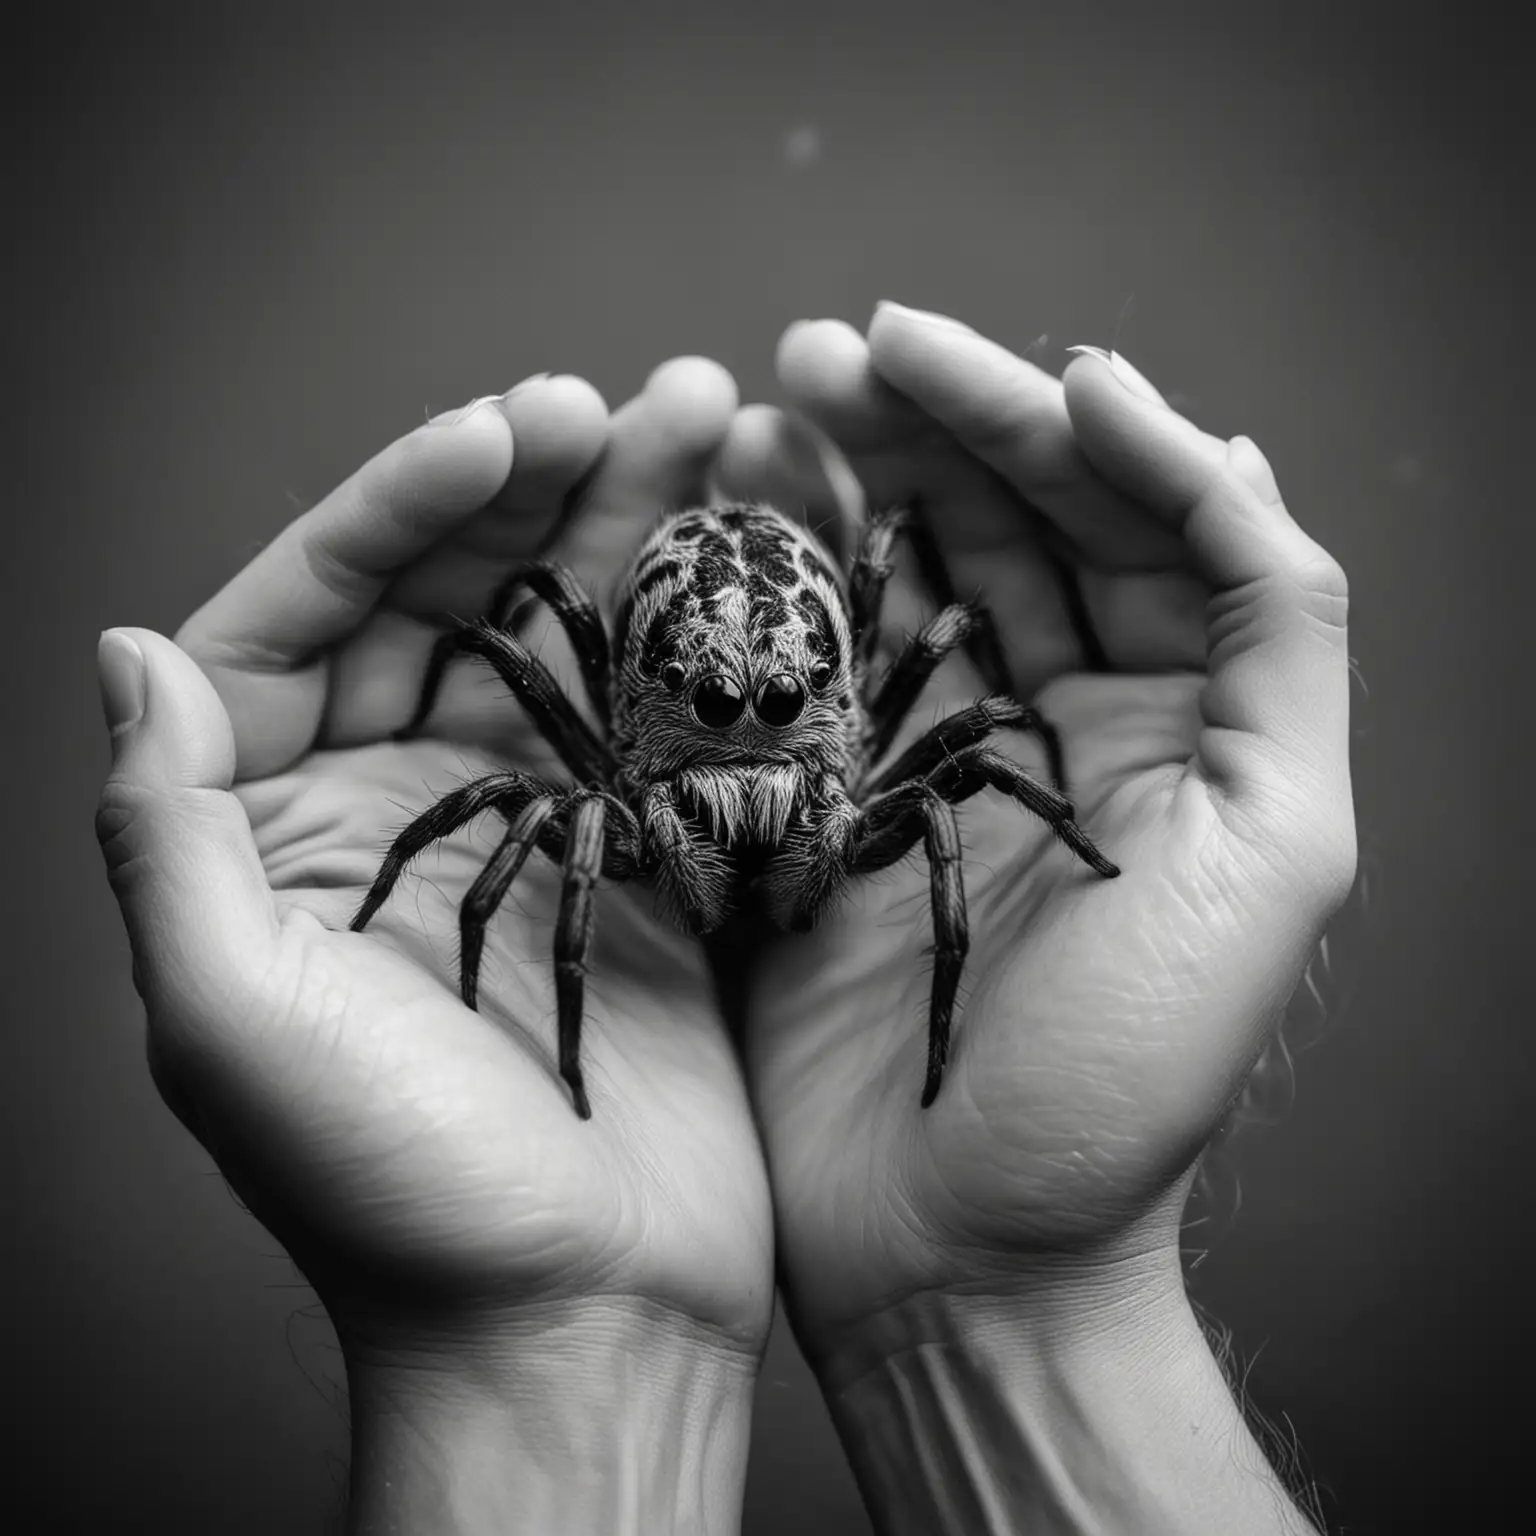 Overcoming Fear CloseUp Black and White Image of Hands Holding a Spider